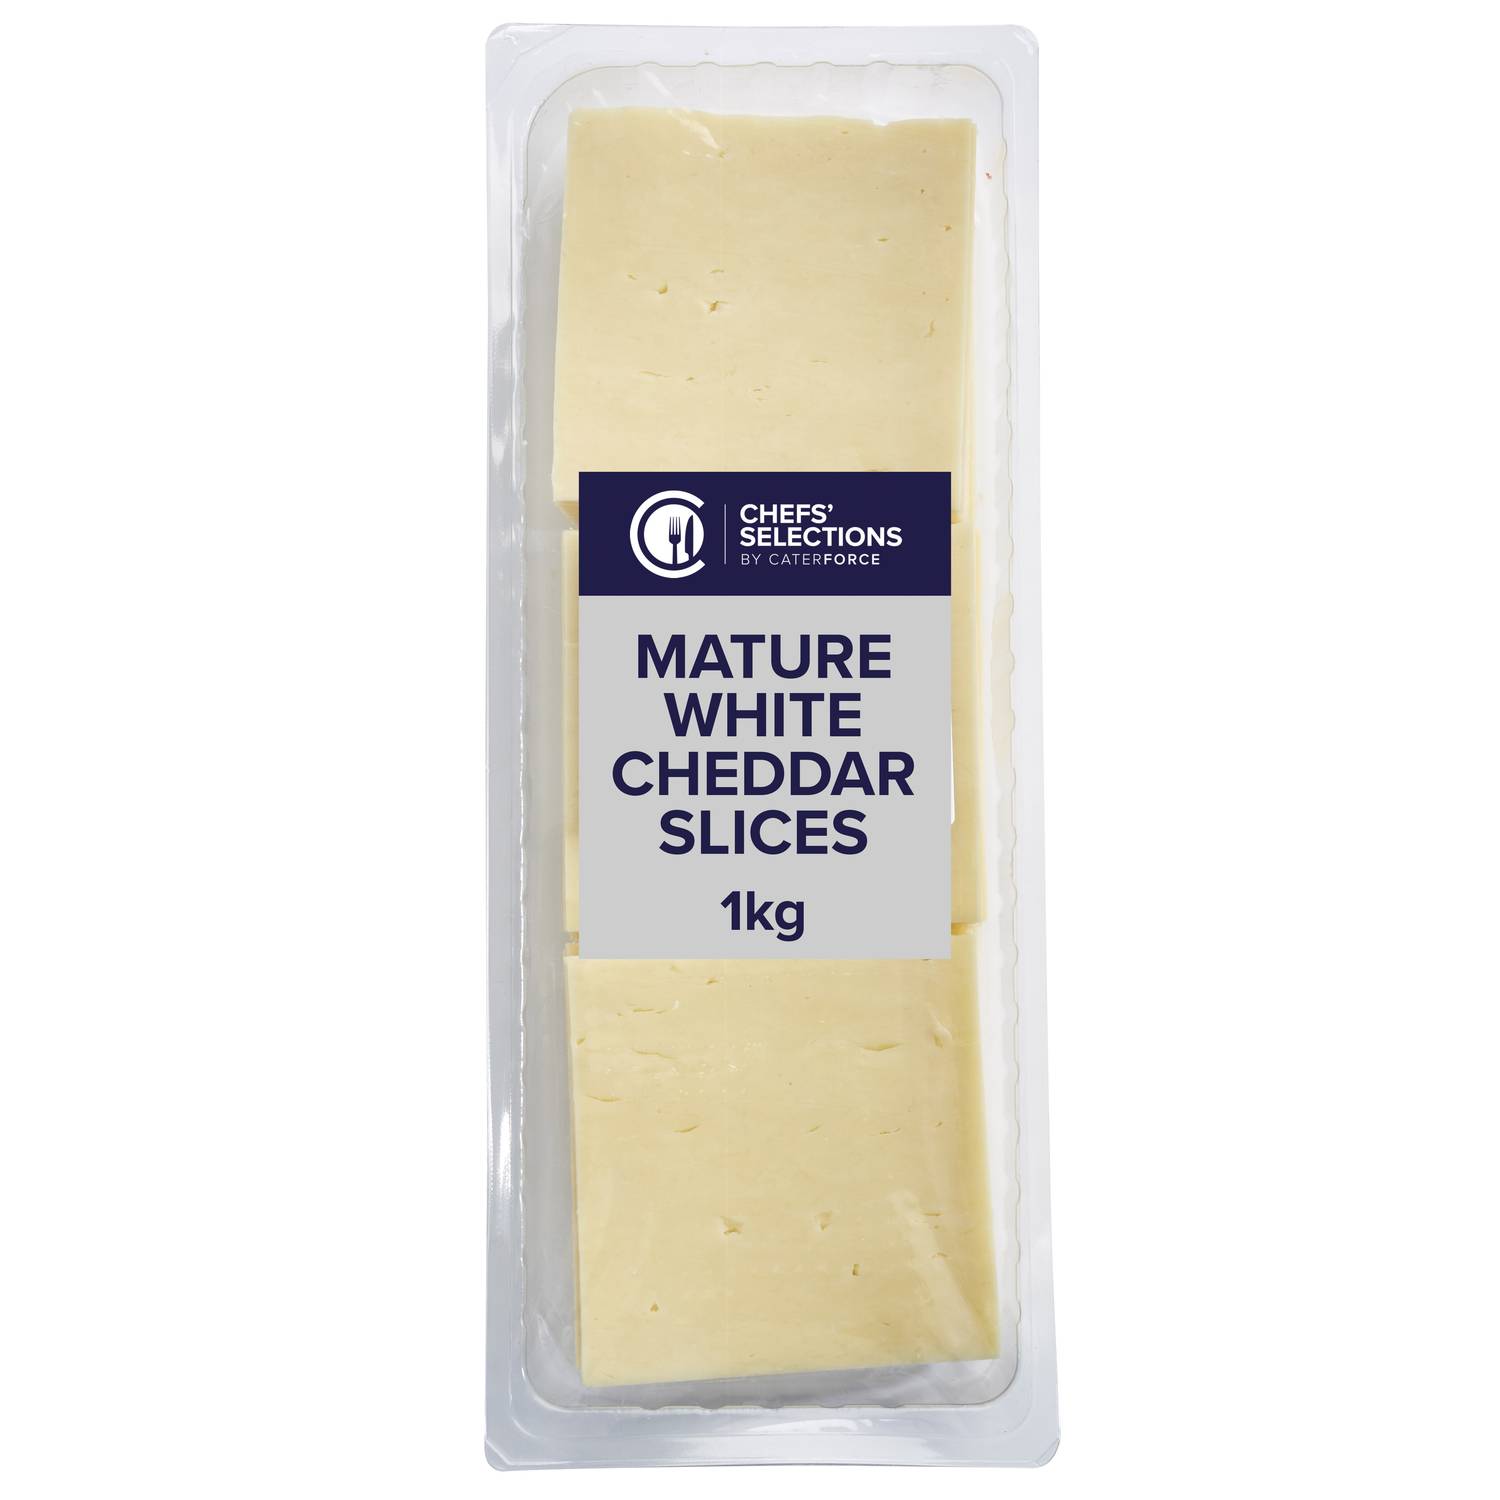 Chefs’ Selections Mature White Cheddar Cheese Slices (6 x 1kg)